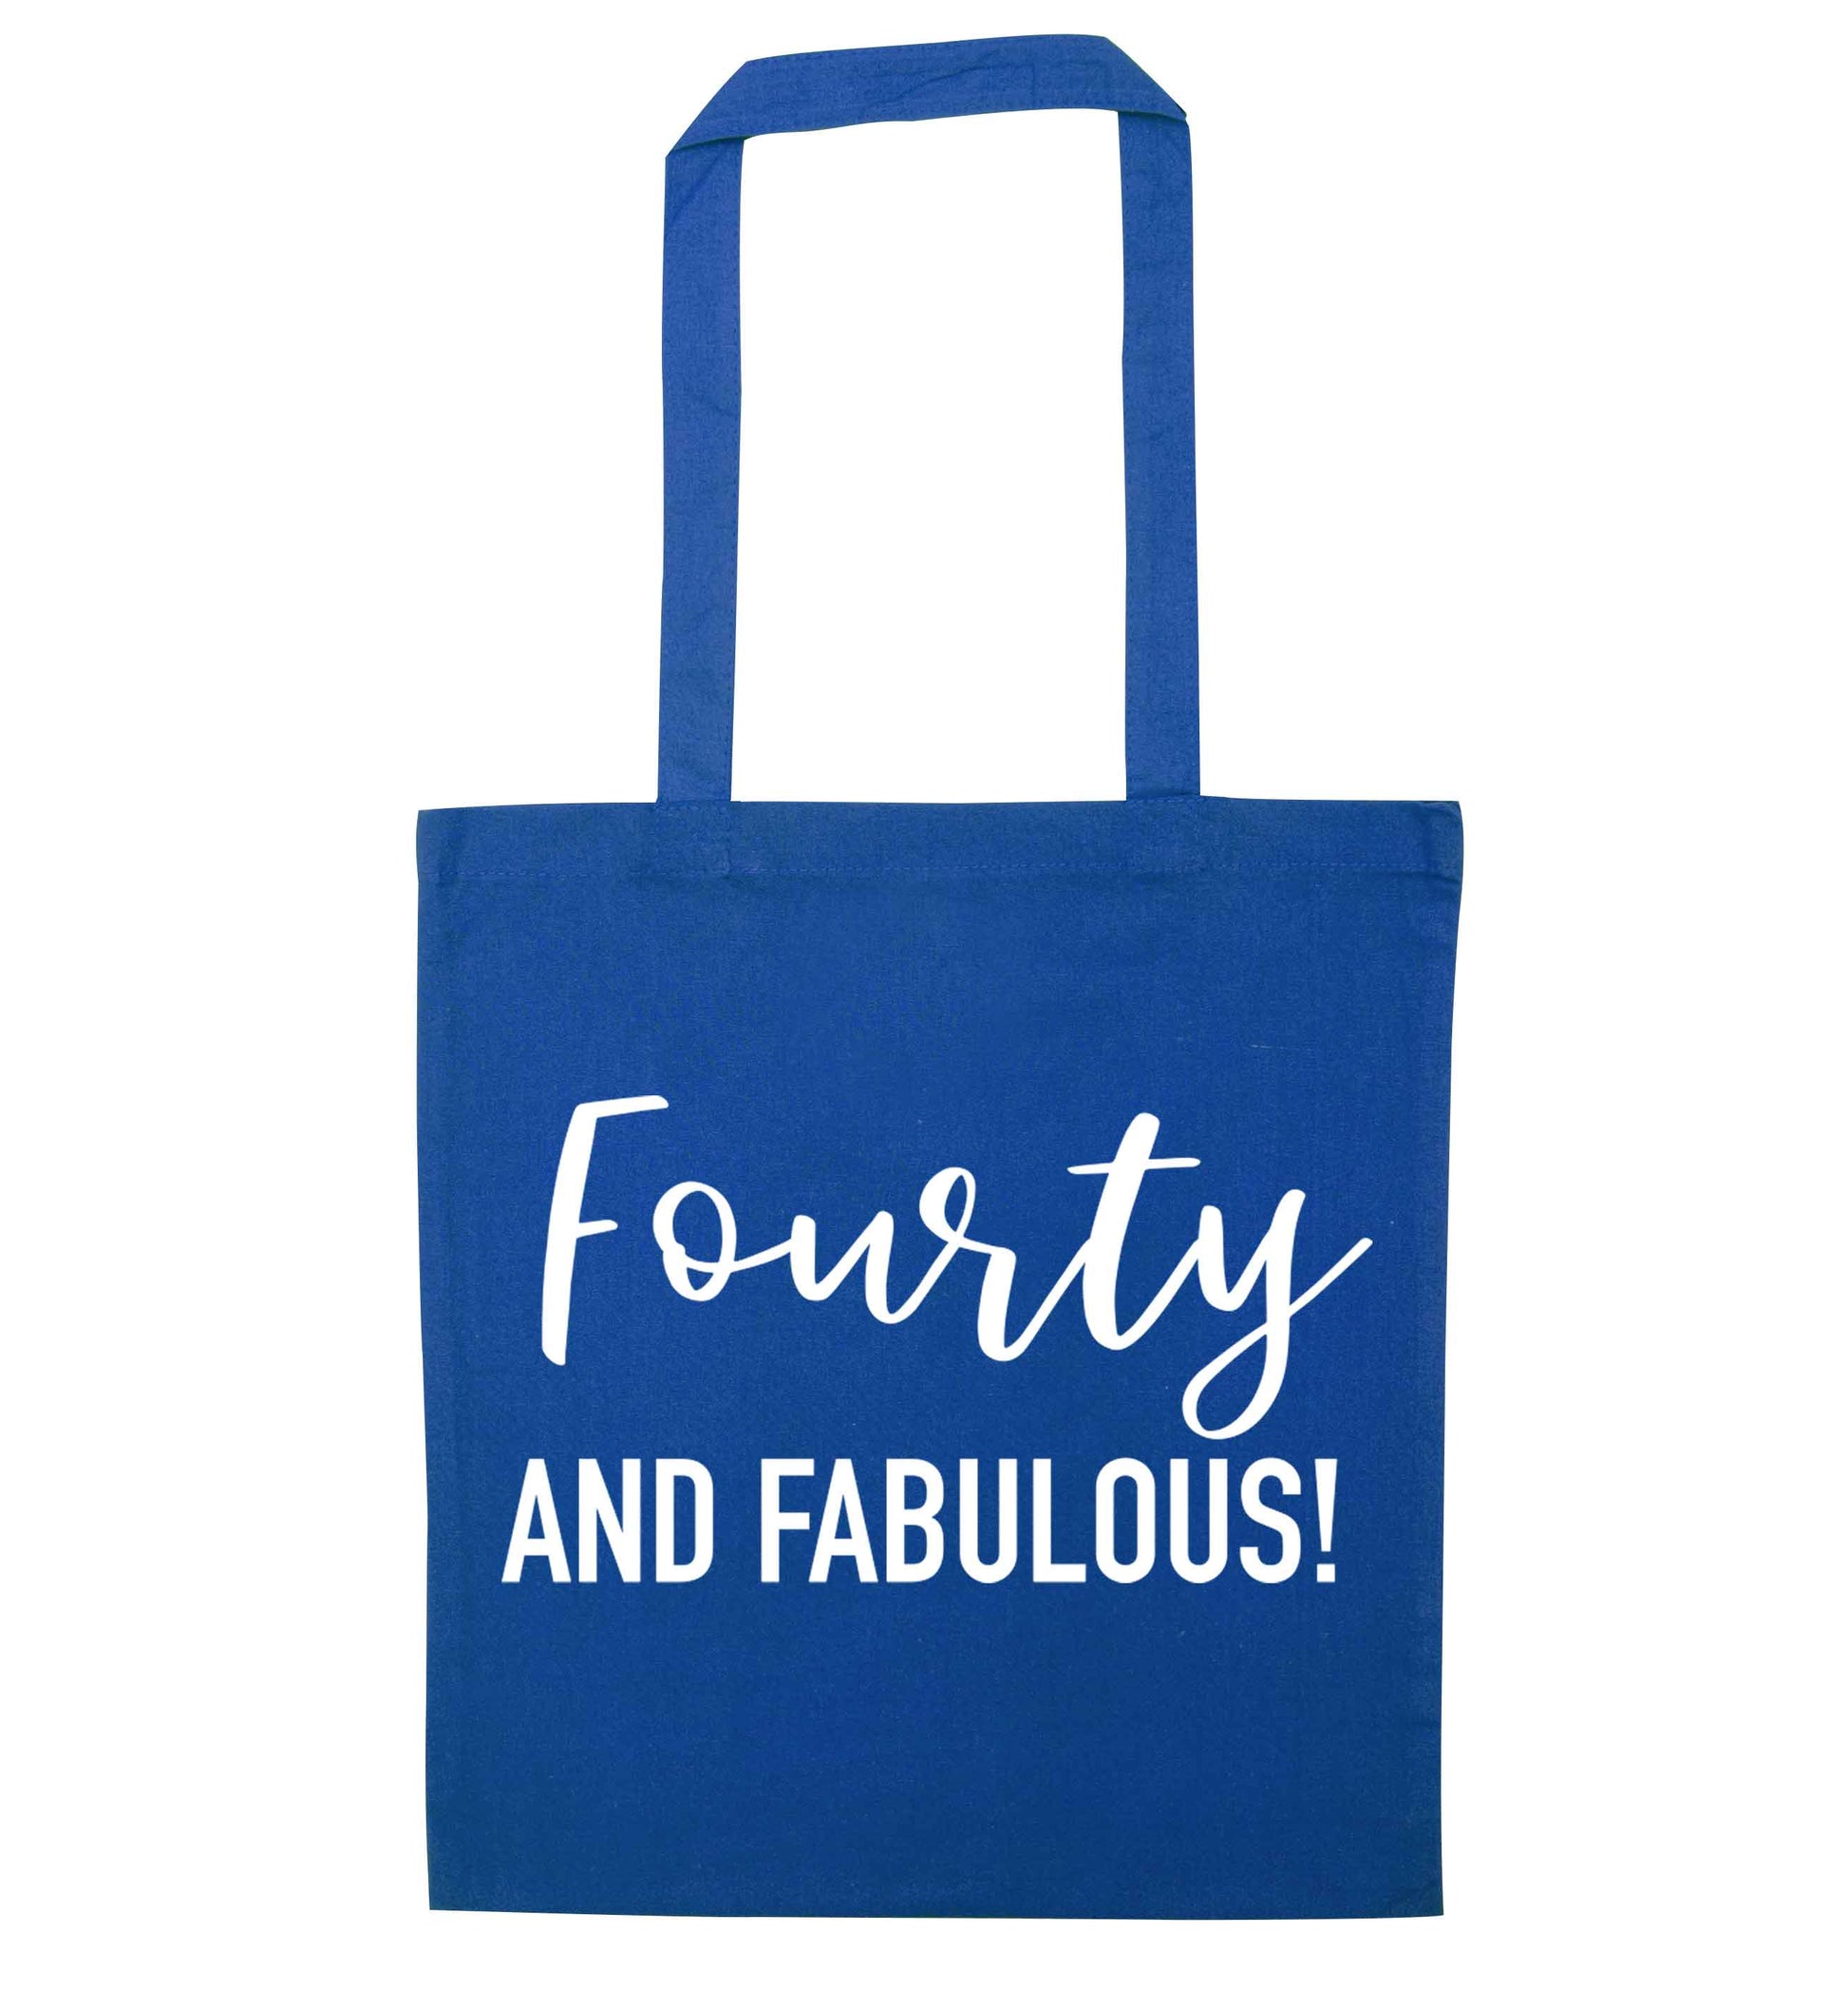 Fourty and fabulous blue tote bag